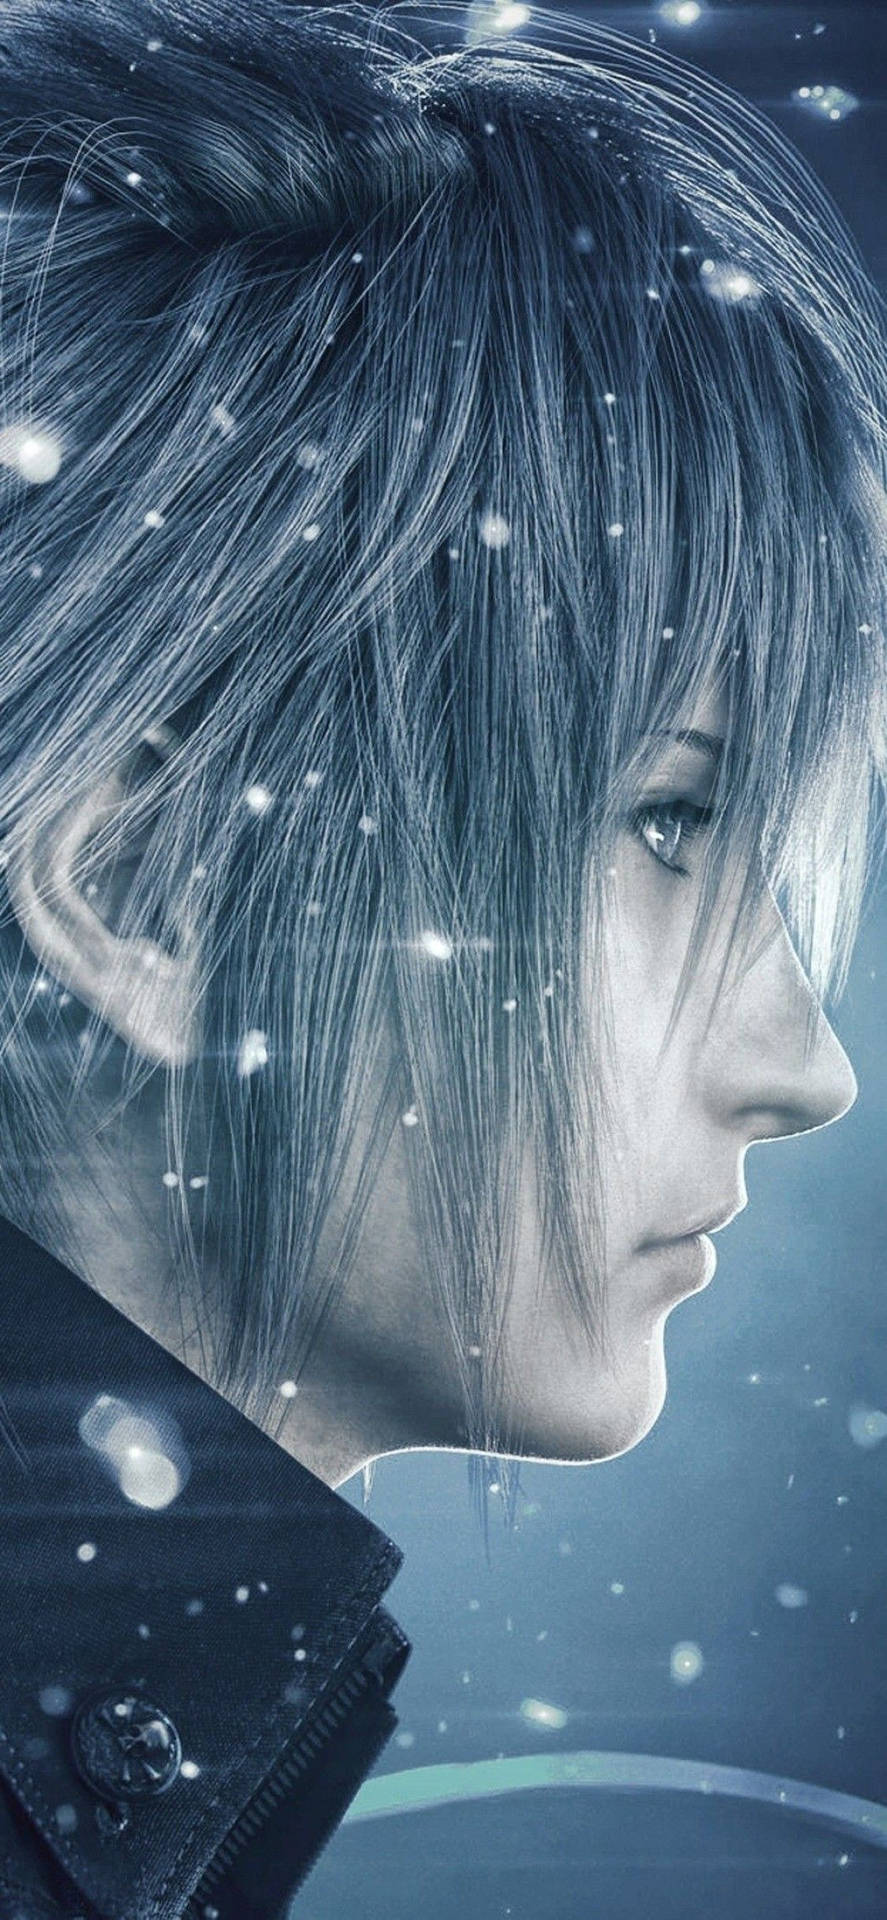 Immerse yourself in a world of magic and adventure with Final Fantasy on iPhone Wallpaper